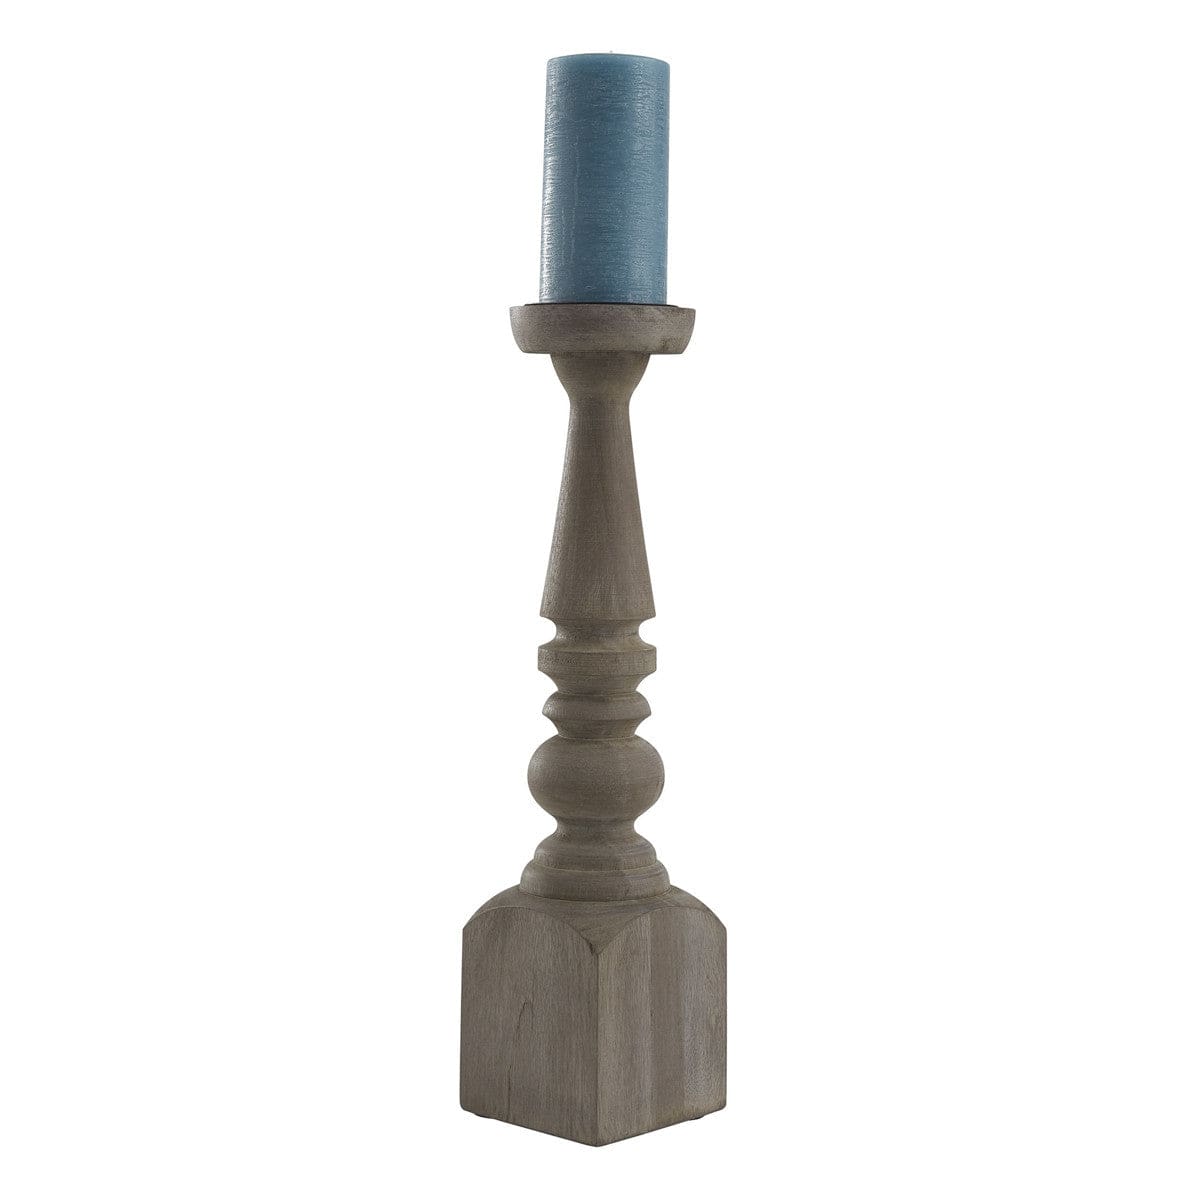 Wood Brighton Candlestick Candle Holder For Pillar Candles - 18" High-Park Designs-The Village Merchant